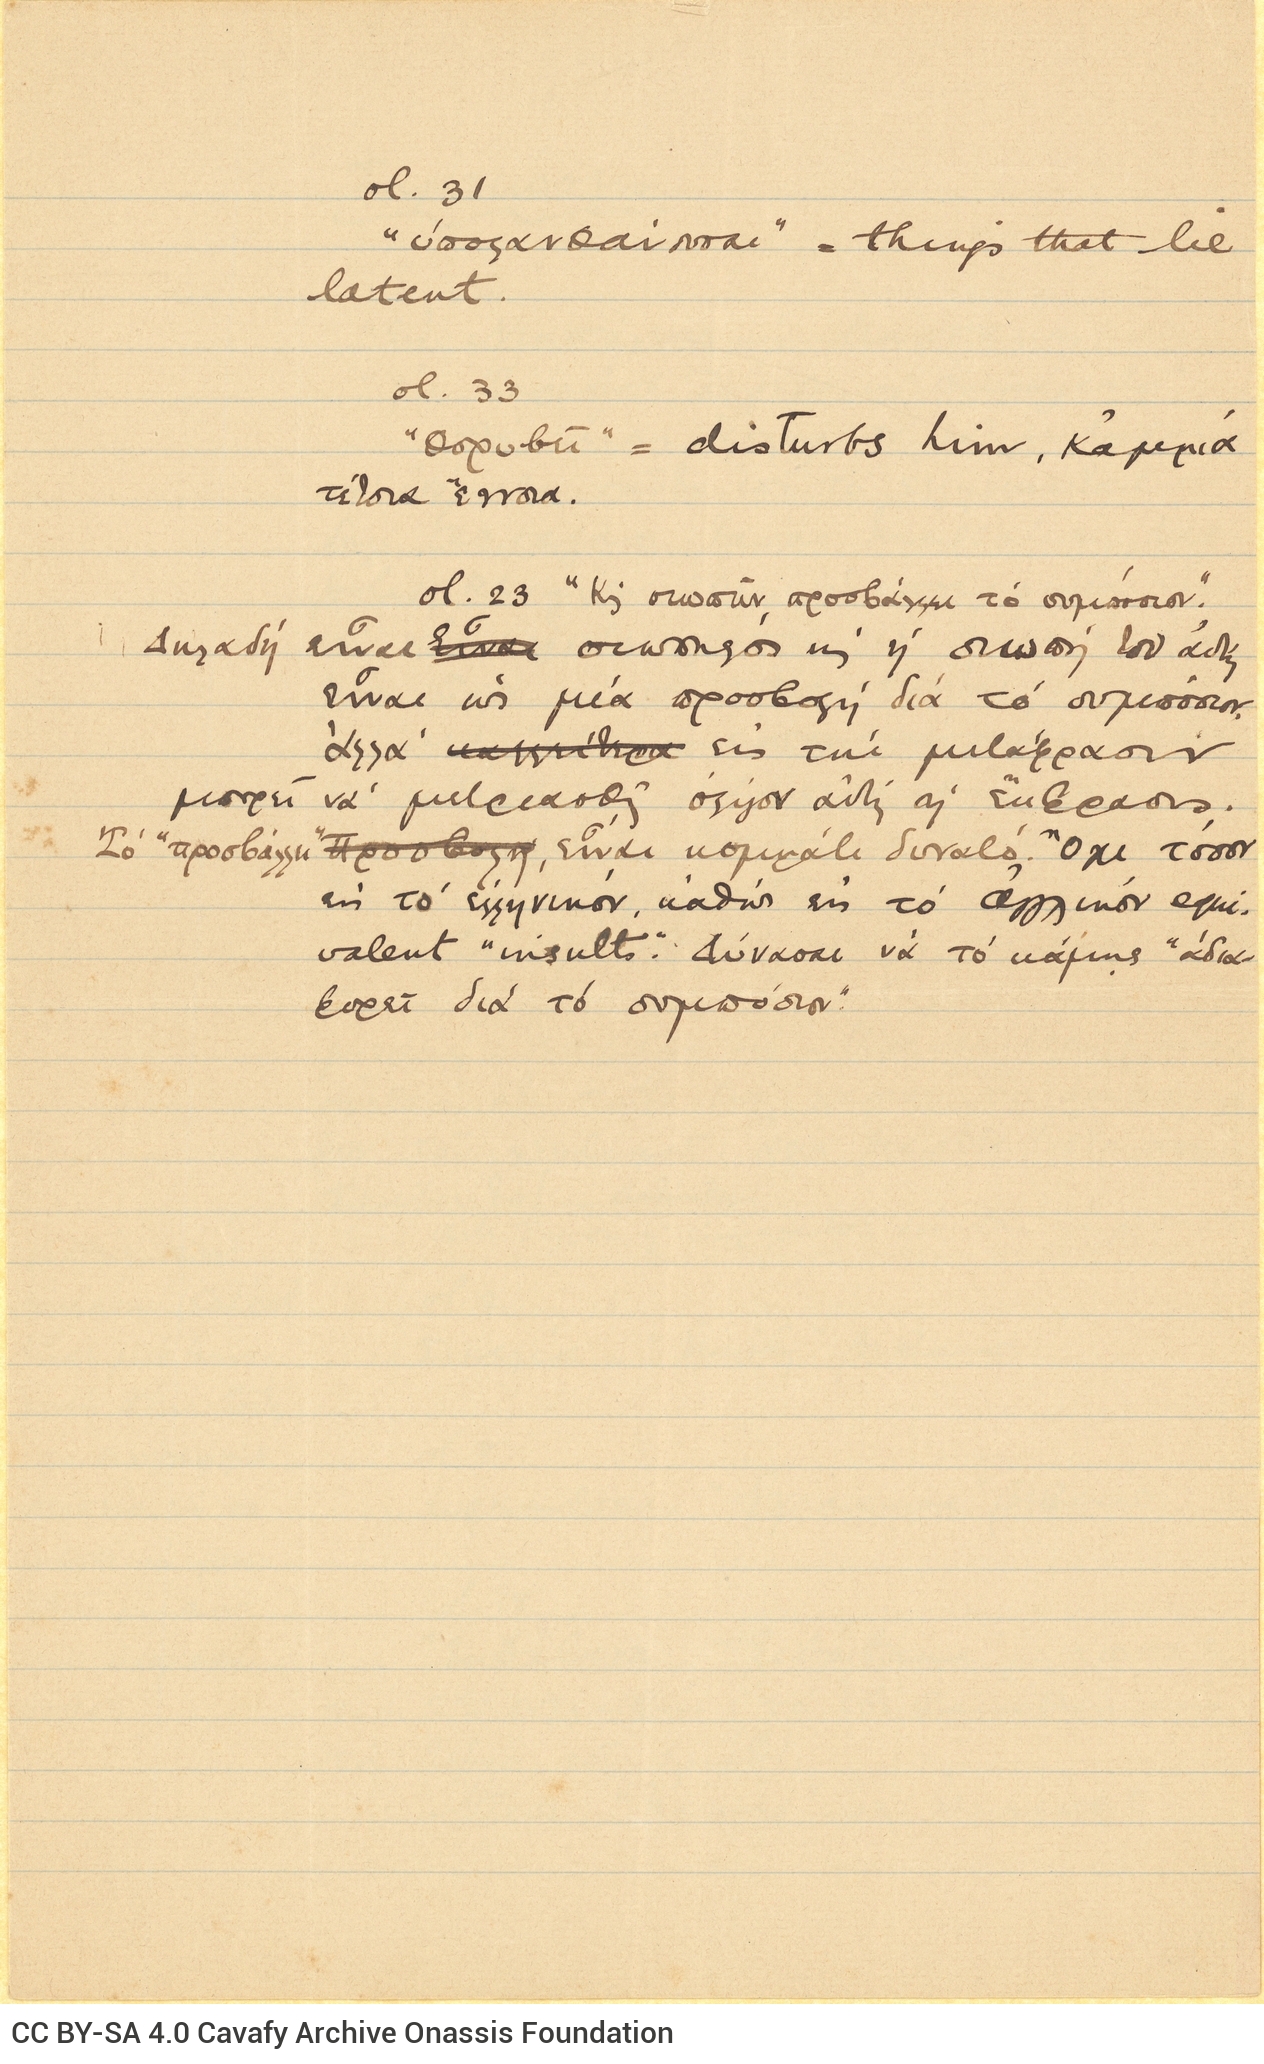 Handwritten notes on the first three pages of a double sheet notepaper. Instructions for the translation of the poem "Timo